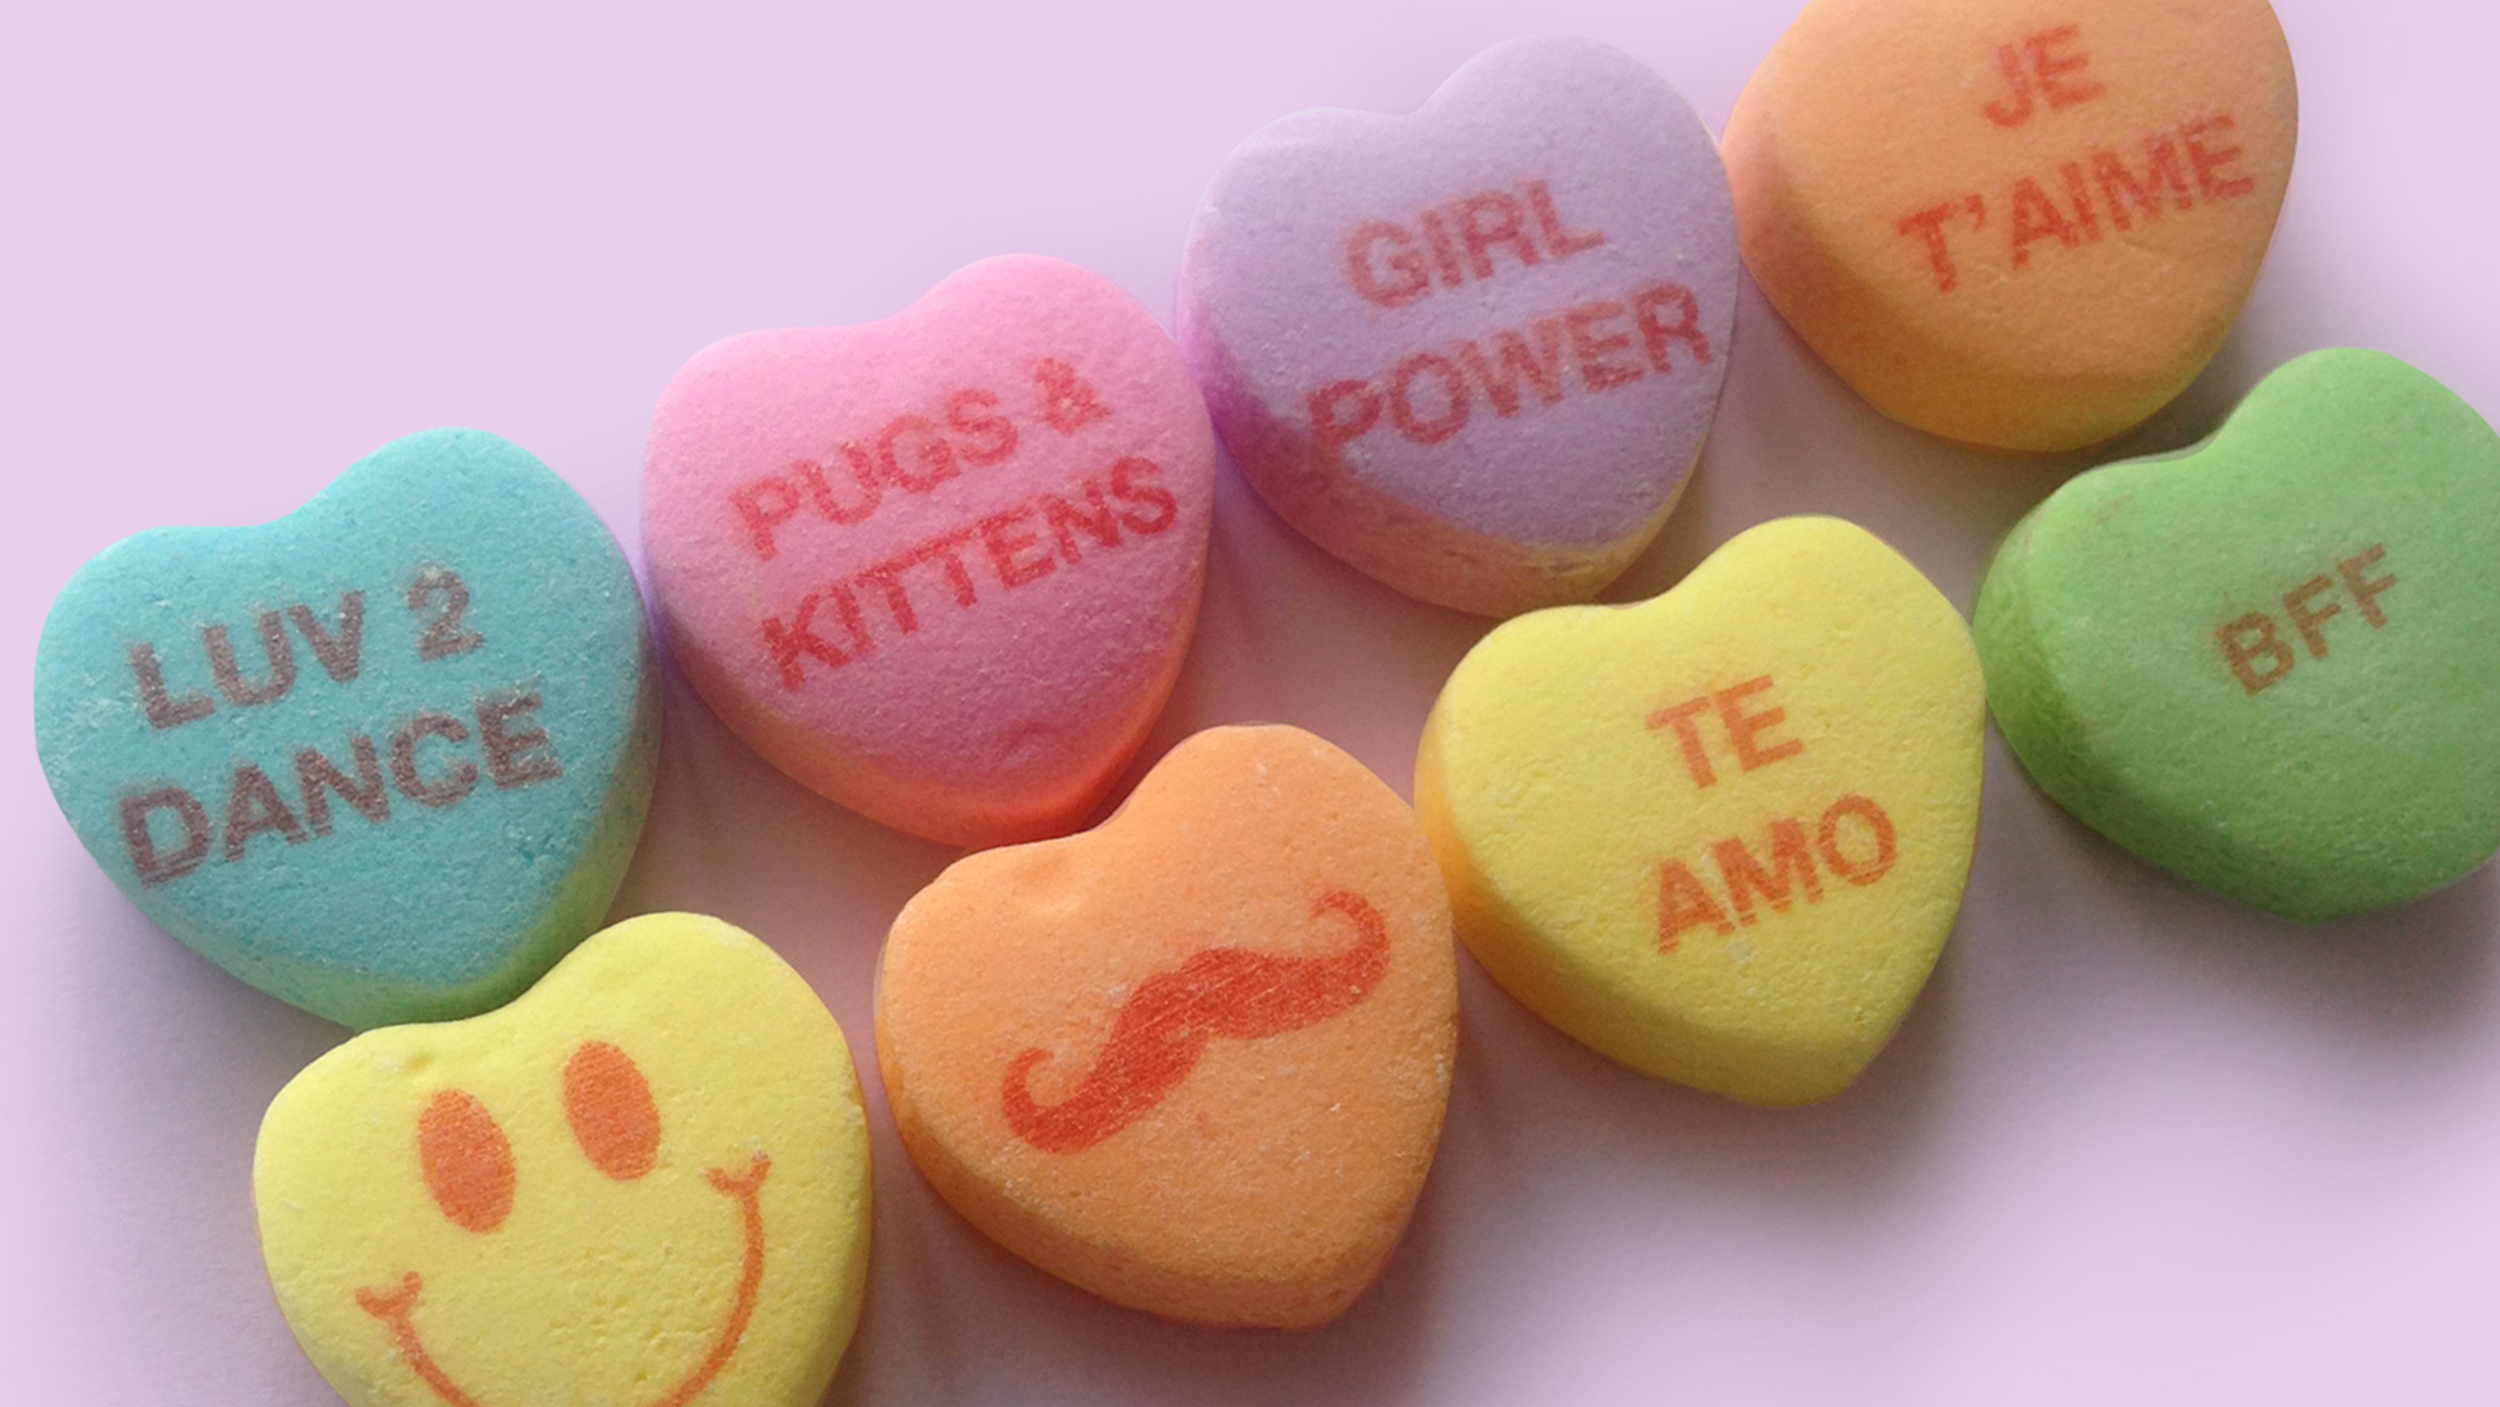 Valentine candy hearts have puppy and kitty love this year - TODAY.com